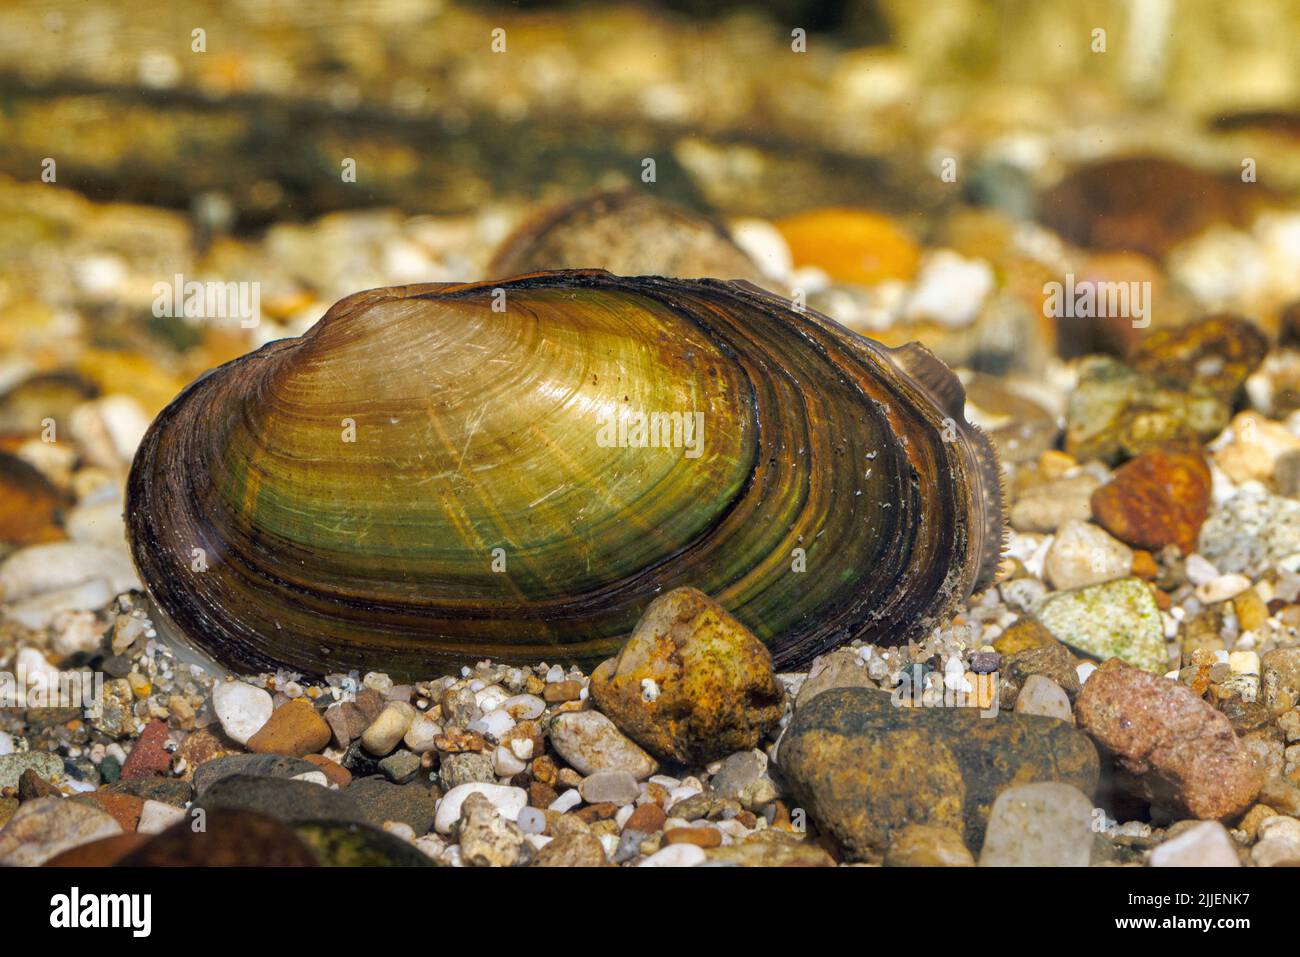 Common river mussel, Common Central European river mussel (Unio crassus), with clearly visible cloak and siphon, Germany Stock Photo